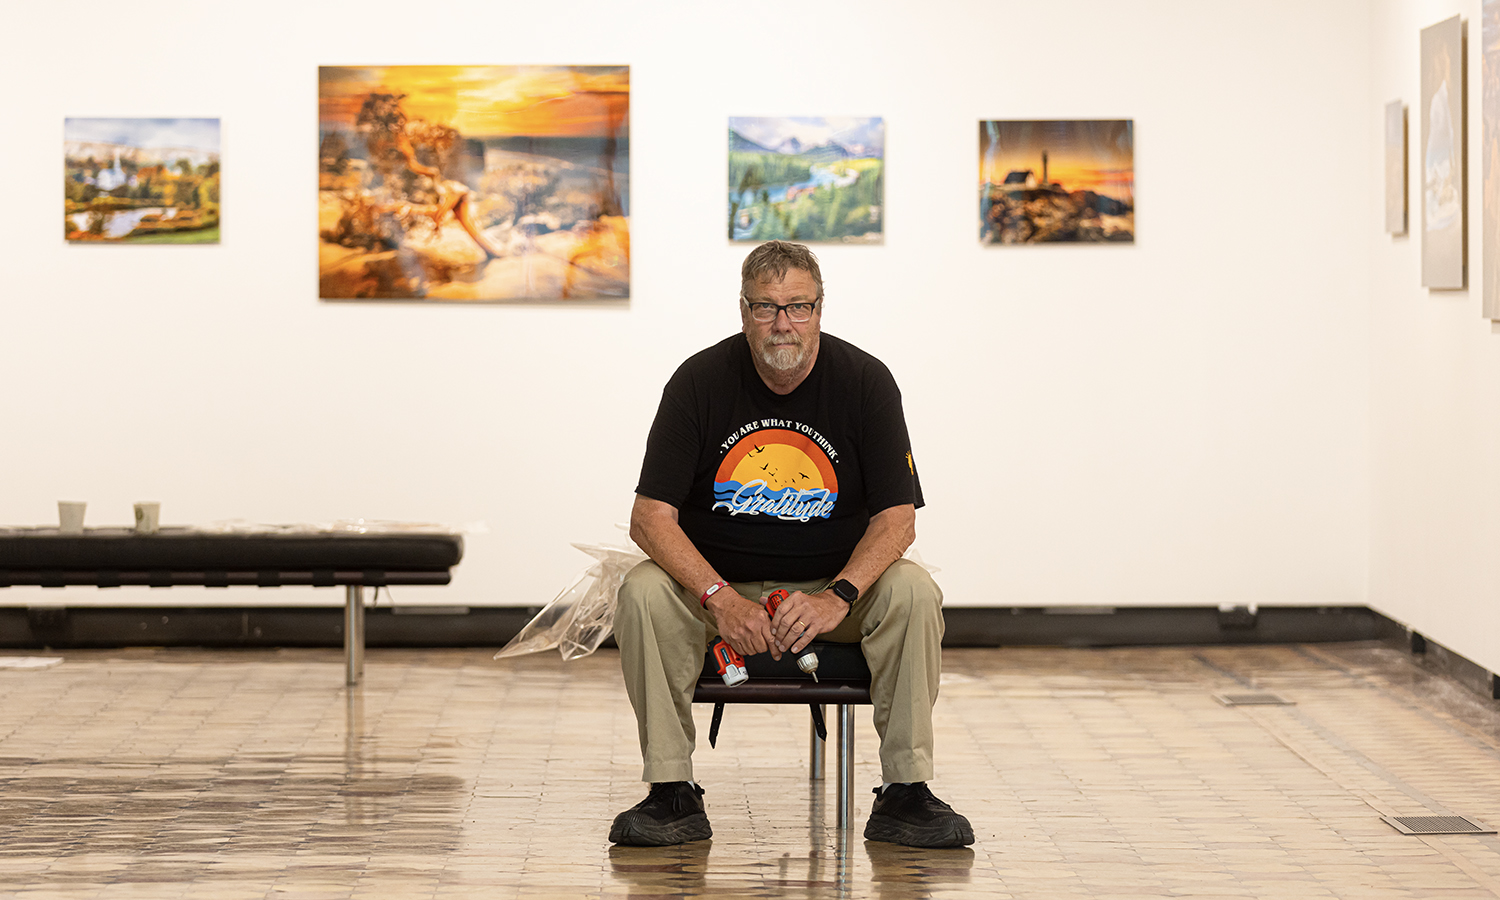 This week, we recognize the work of now retired Lead Photographer Kevin Colton L.H.D.’23. Here, Colton poses among a collection of his landscape prints at the Davis Art Gallery at Houghton House.